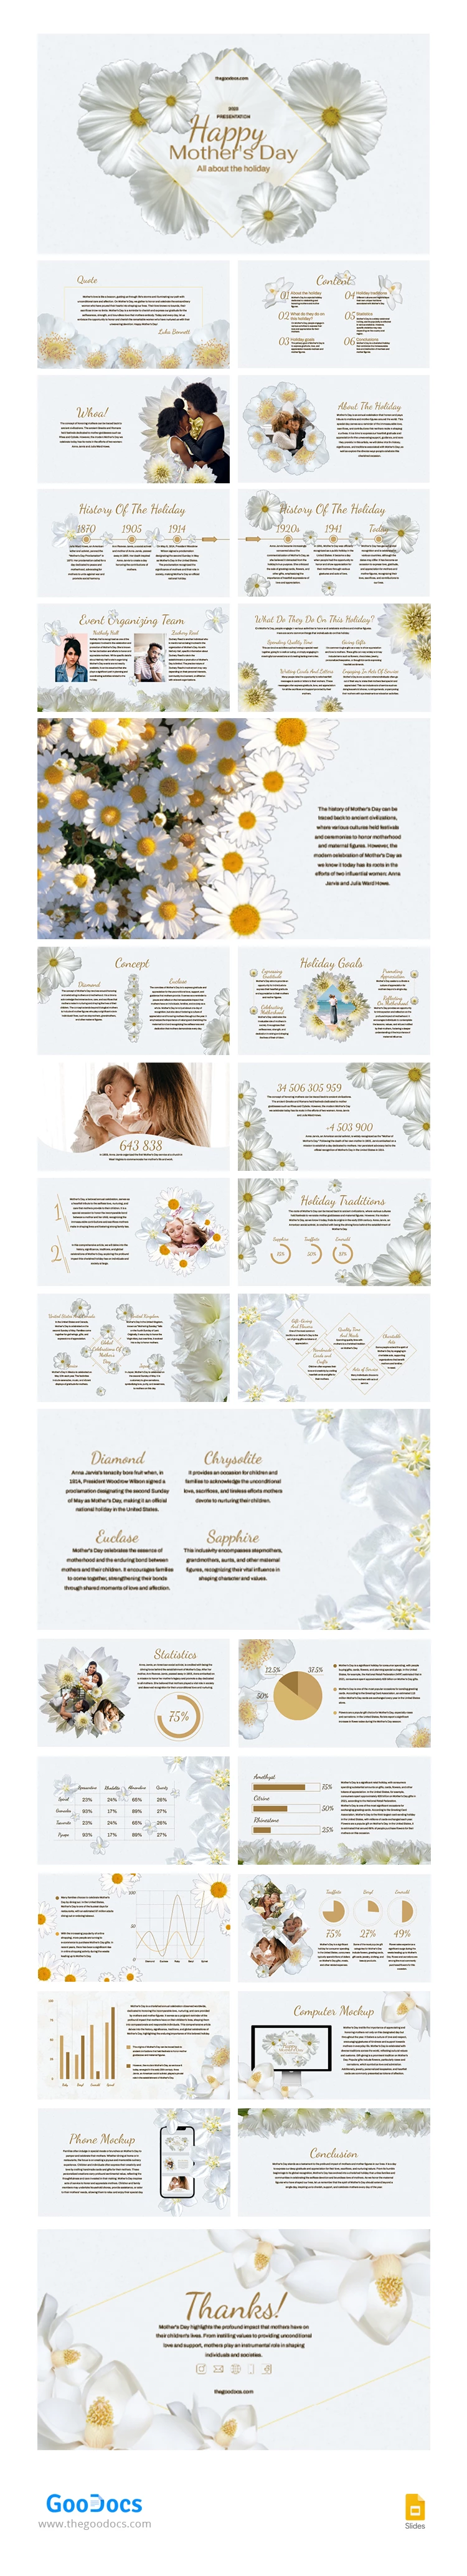 White Floral Mother's Day - free Google Docs Template - 10067017